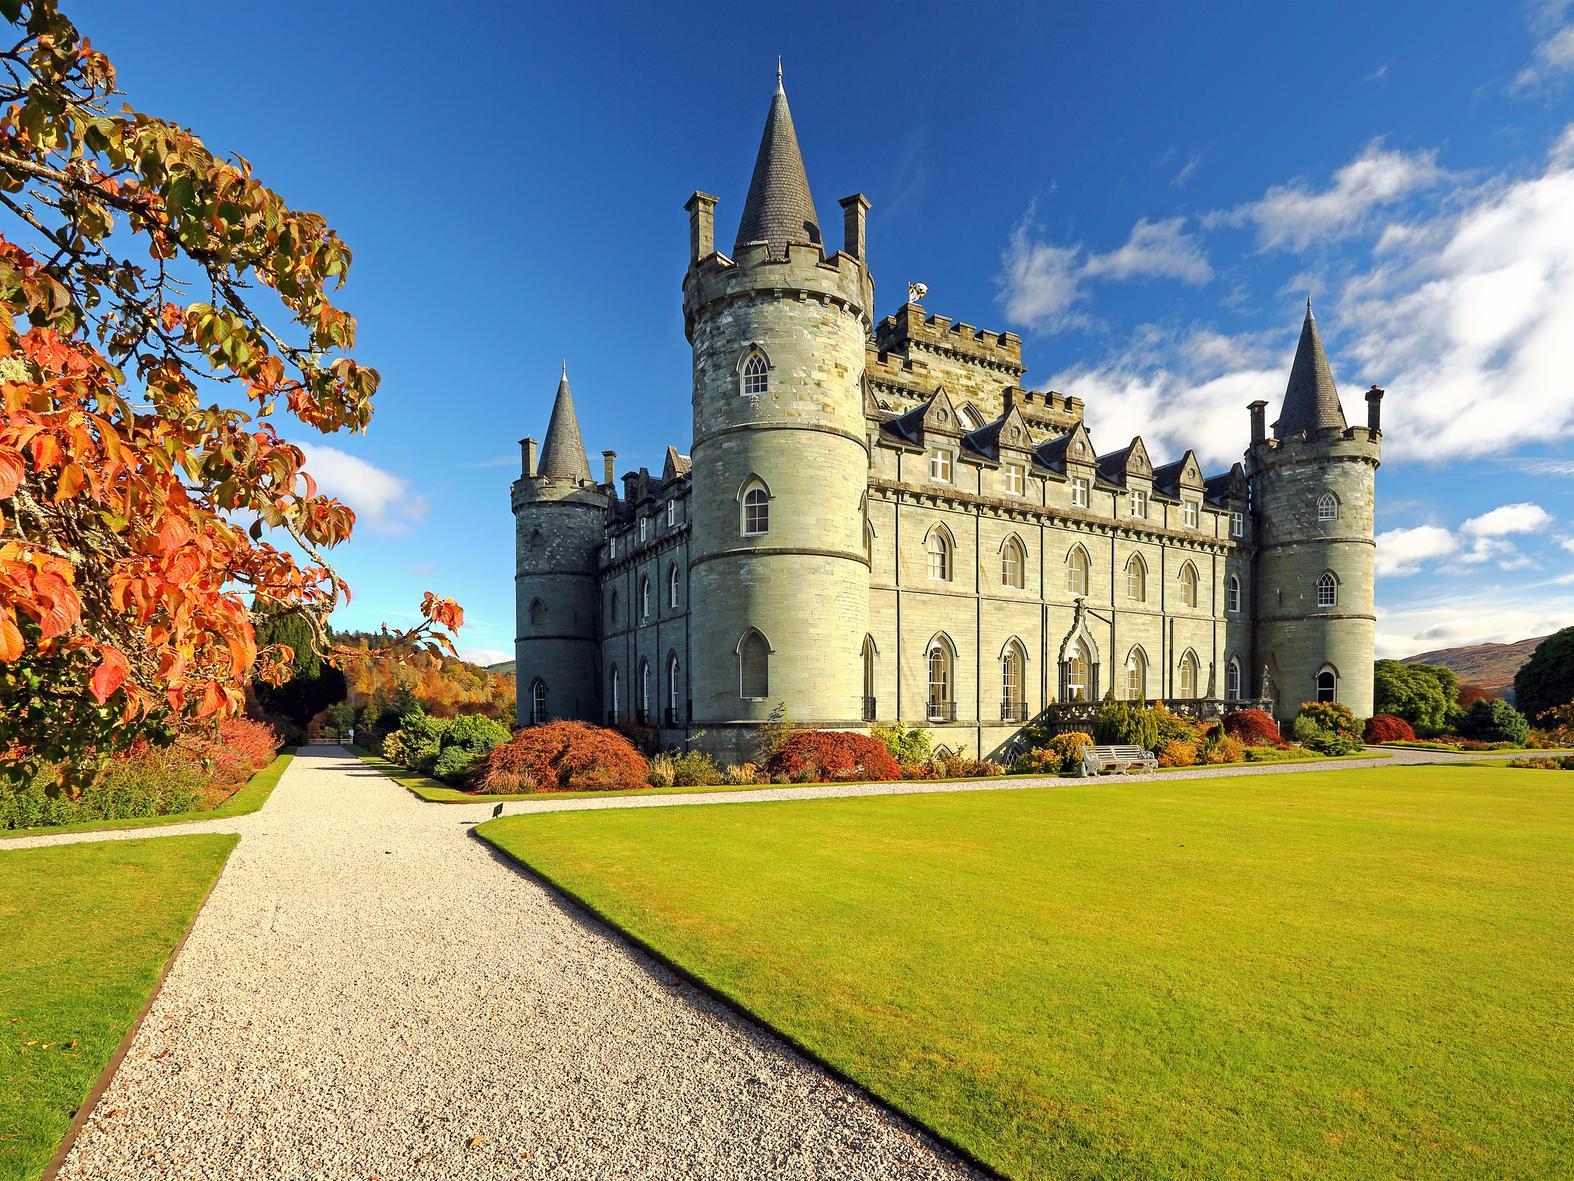 Inveraray Castle was the filming location for the Downton Abbey Christmas episode in 2012. This two-hour special saw the Grantham family and staff travel to the home of their cousins in their Scottish home, Duneagle Castle.